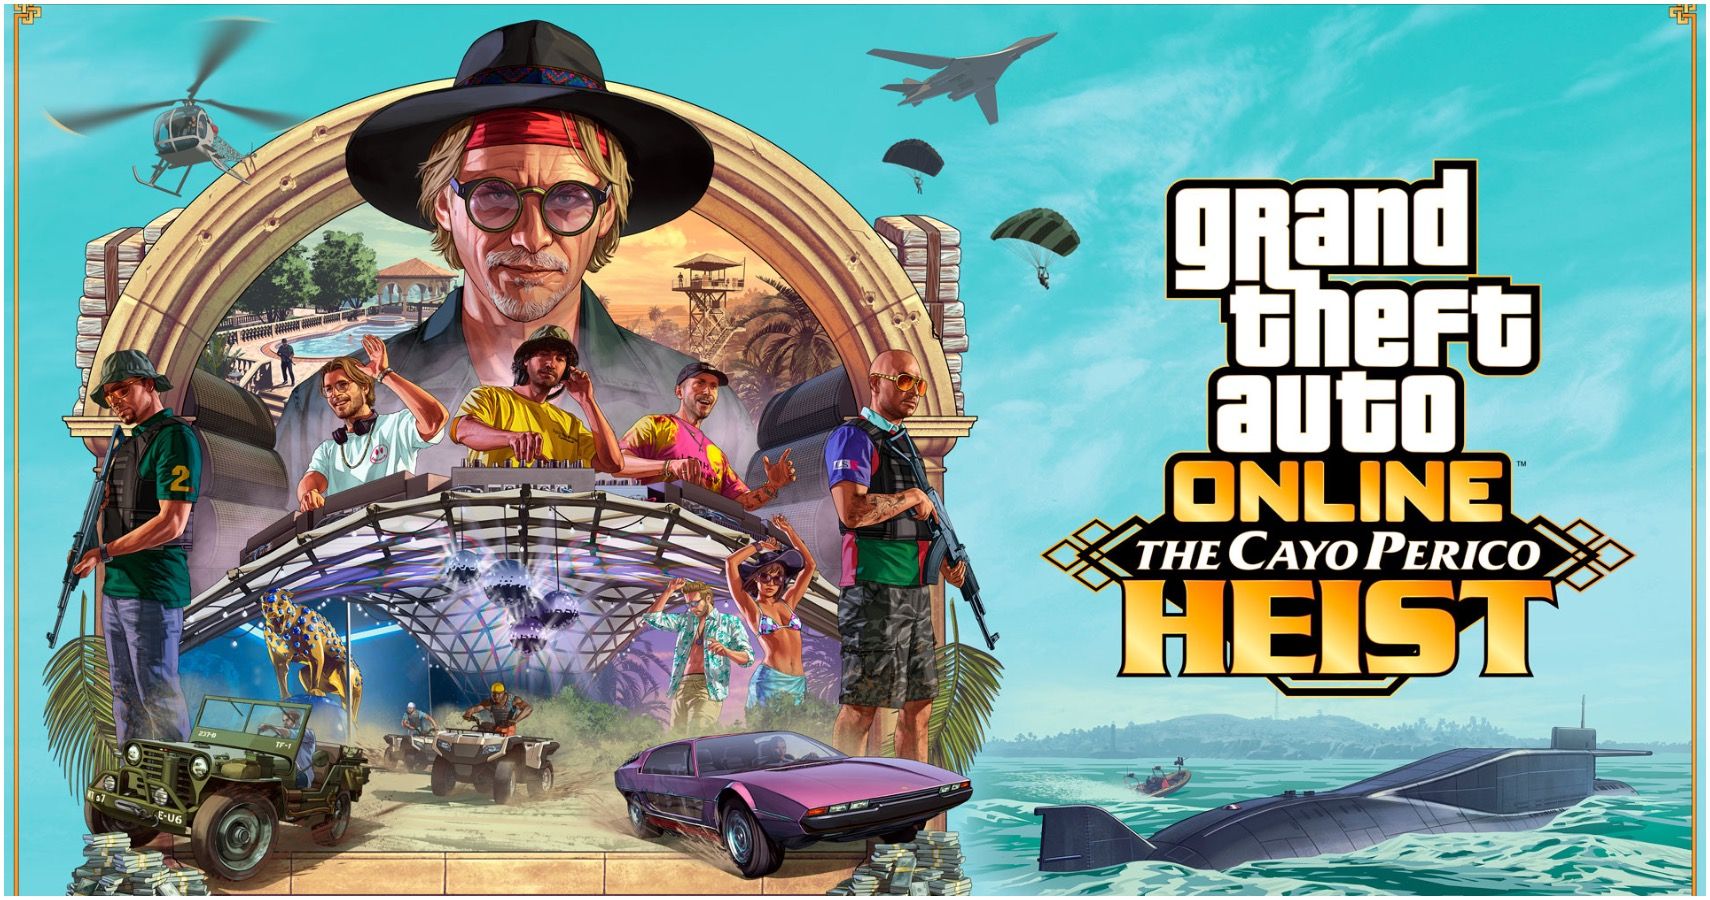 The artwork featured for the GTA Online update